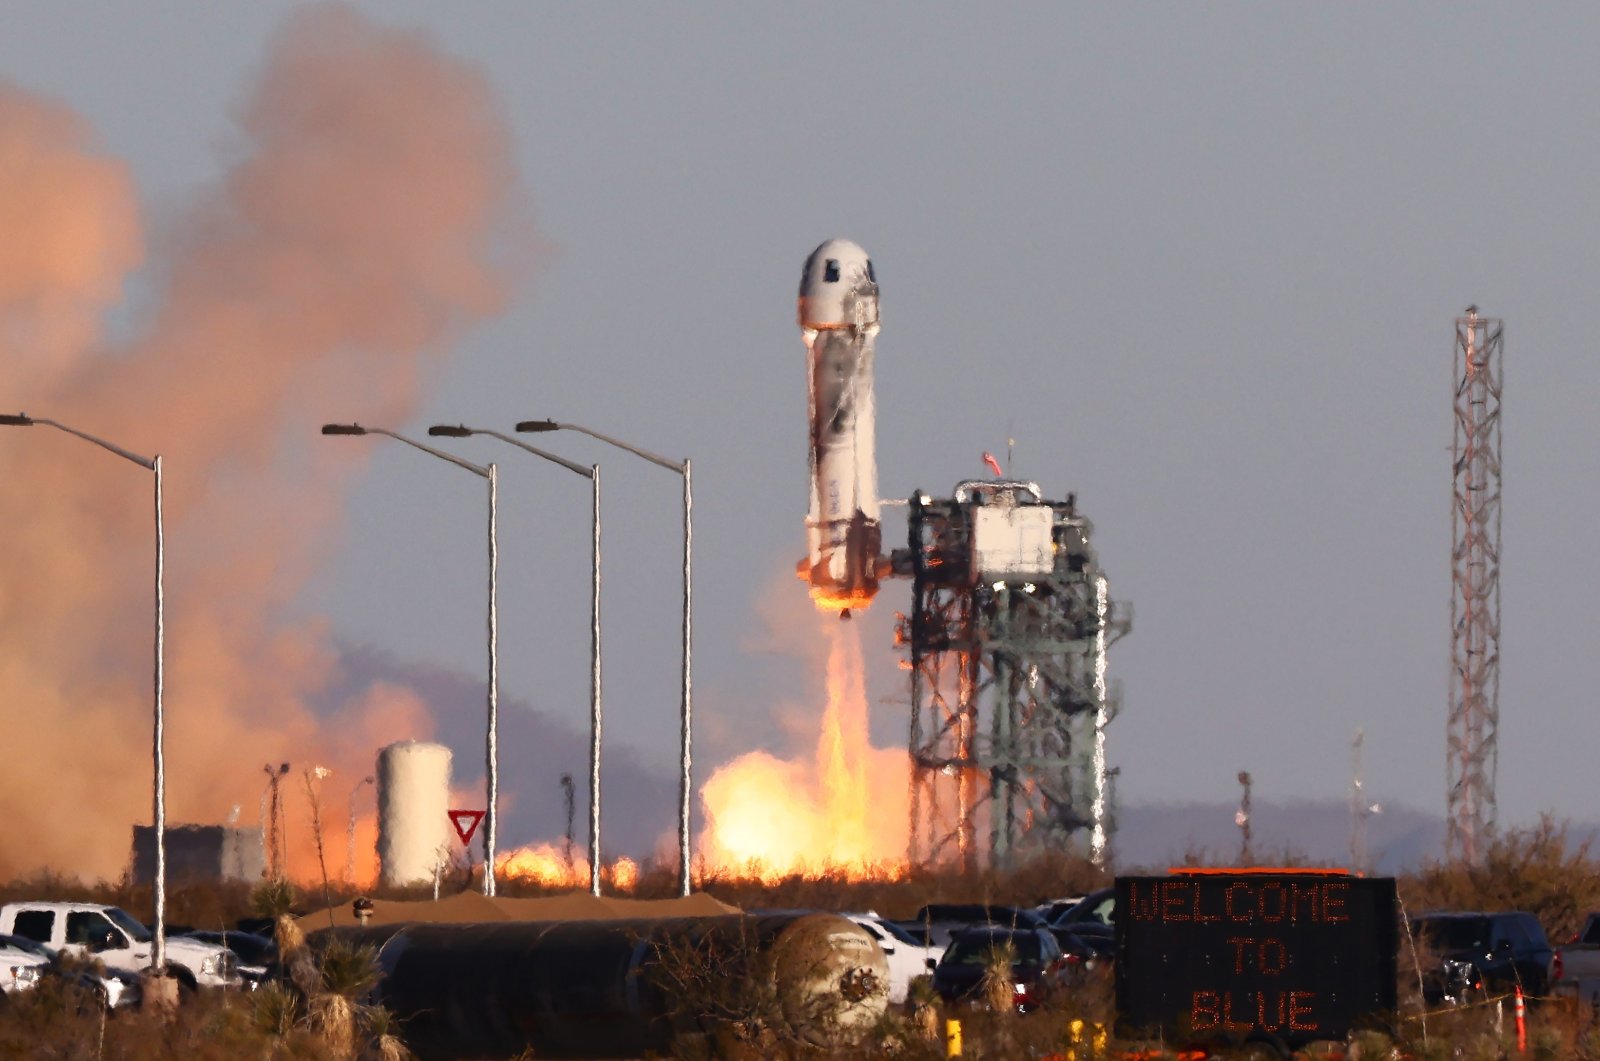 Blue Origin New Shepard lifts off from the Launch Site One launch pad carrying Good Morning America co-anchor Michael Strahan, Laura Shepard Churchley, daughter of astronaut Alan Shepard, and four other civilians, Dec. 11, 2021 near Van Horn, Texas. (AFP Photo)